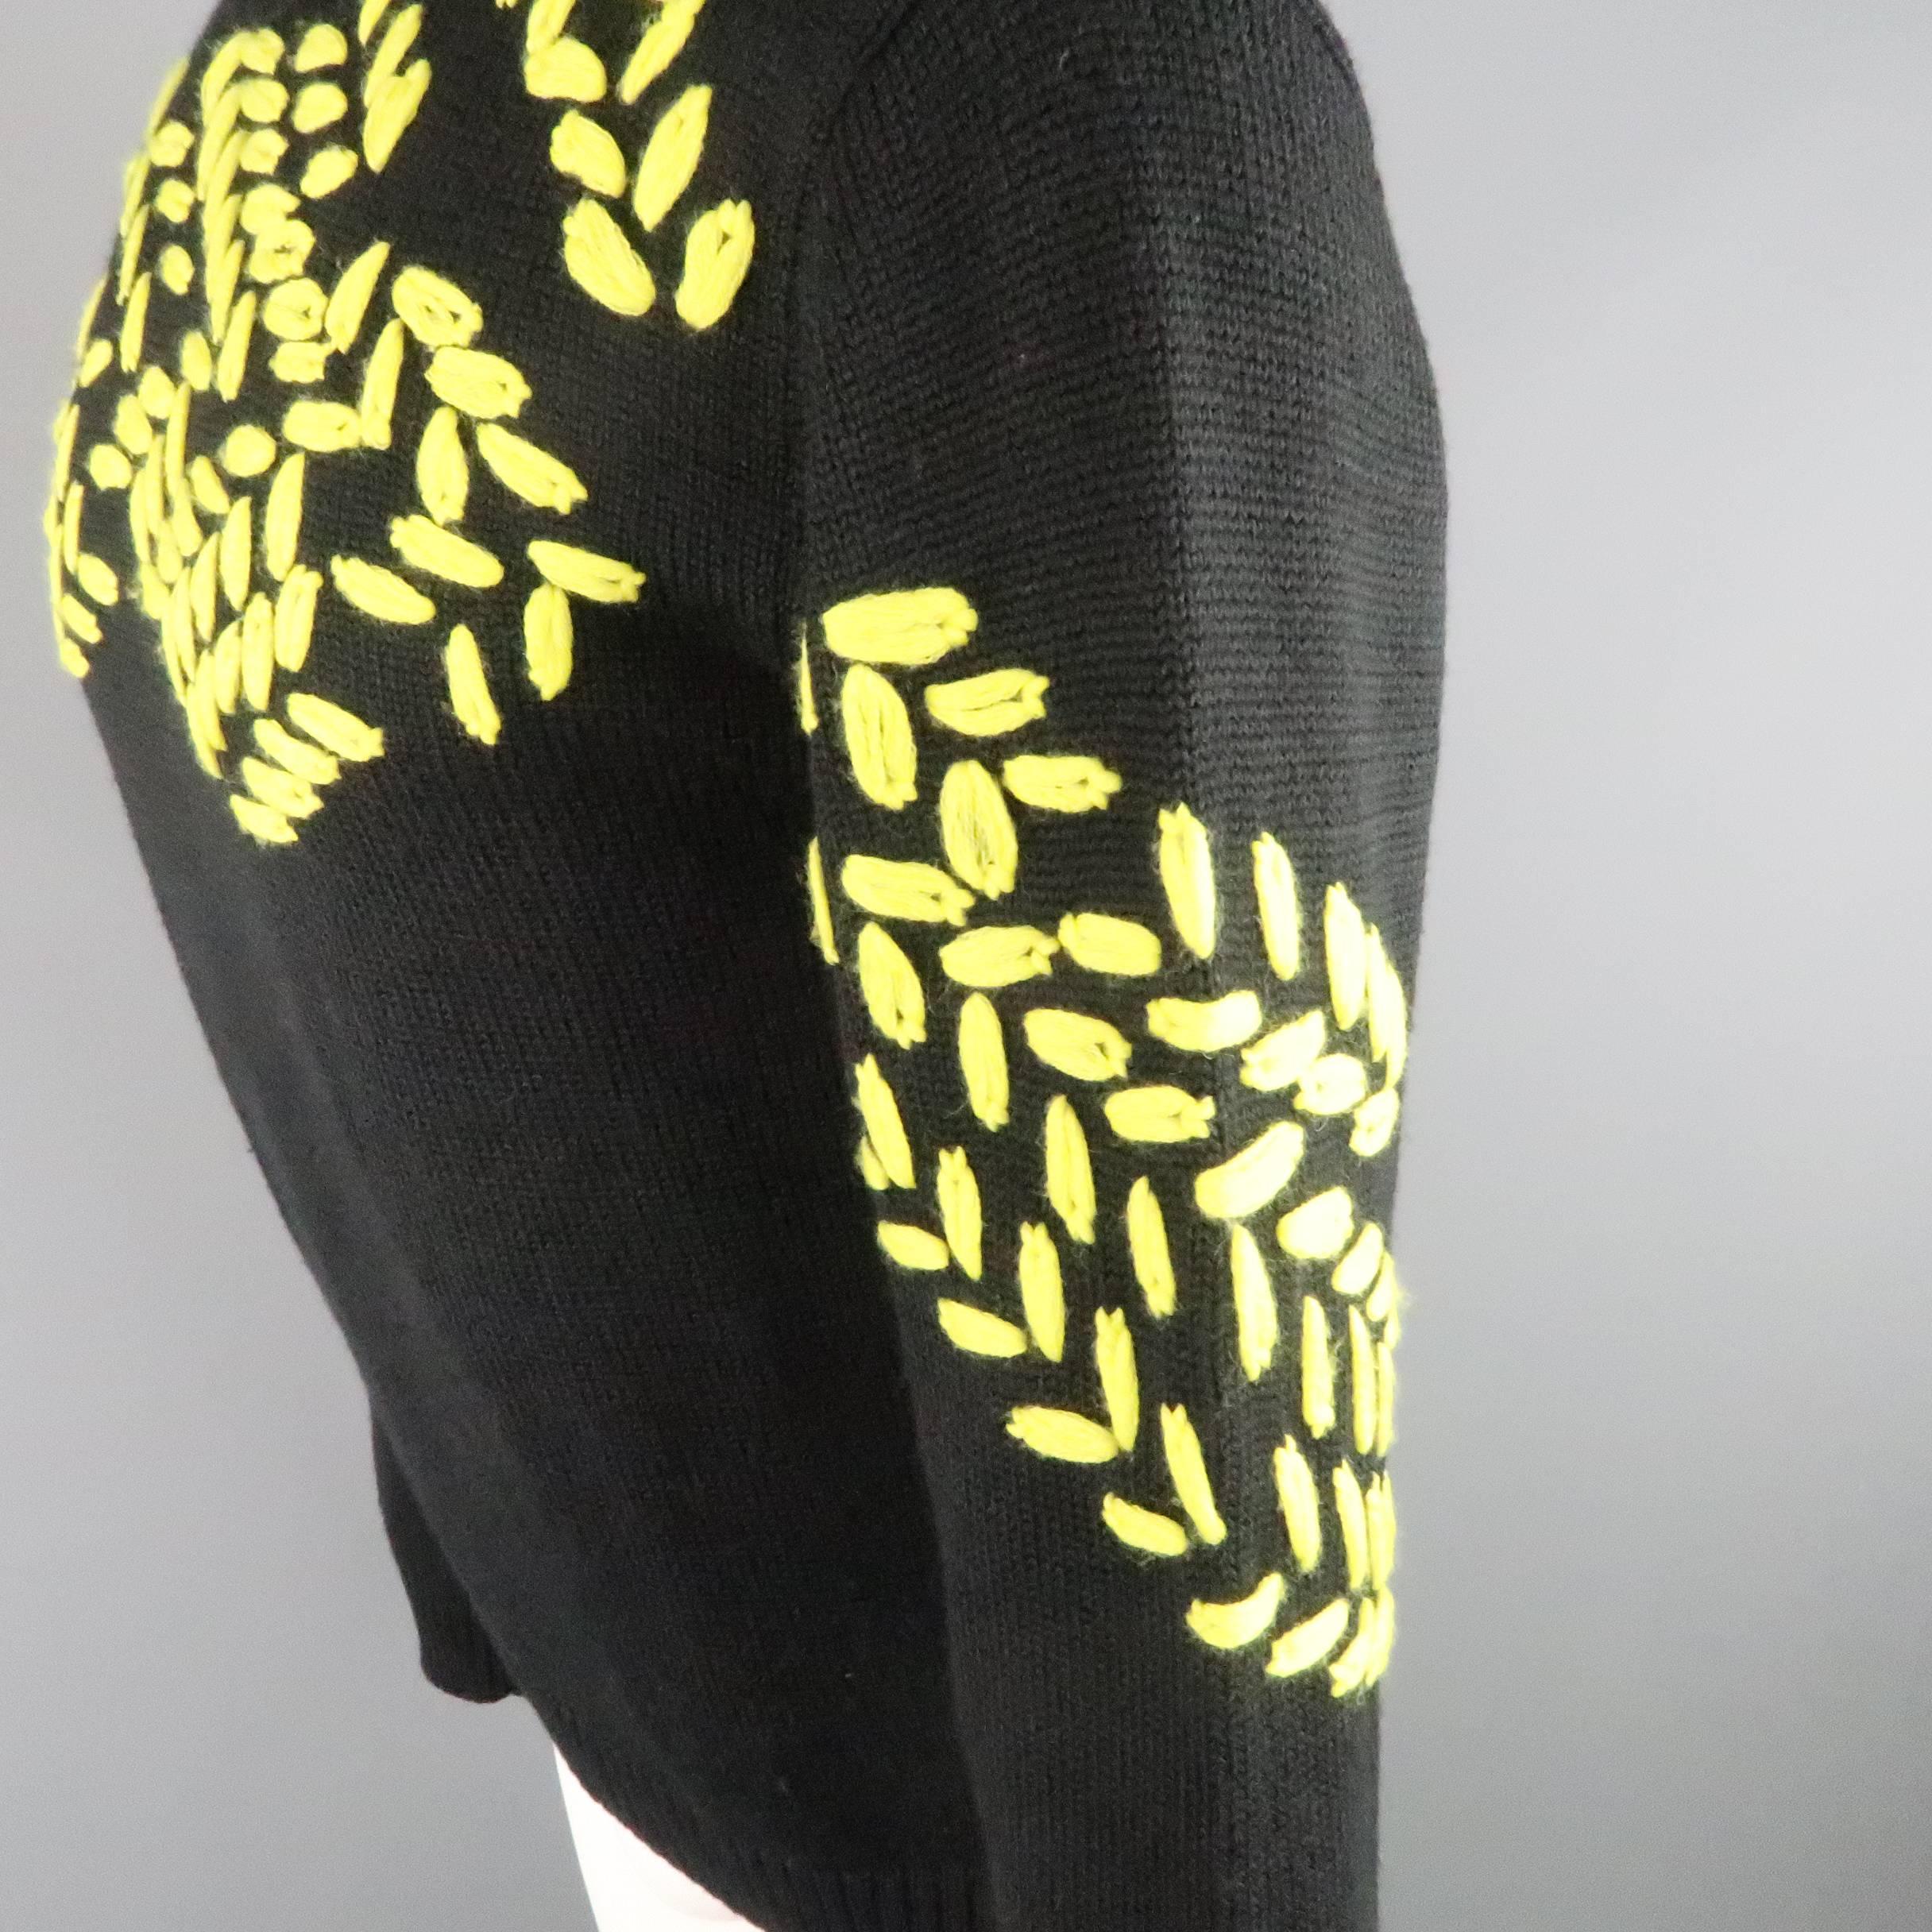 EMPORIO ARMANI EA7 S Black & Yellow Embroidered Wool Blend Turtleneck Sweater 1